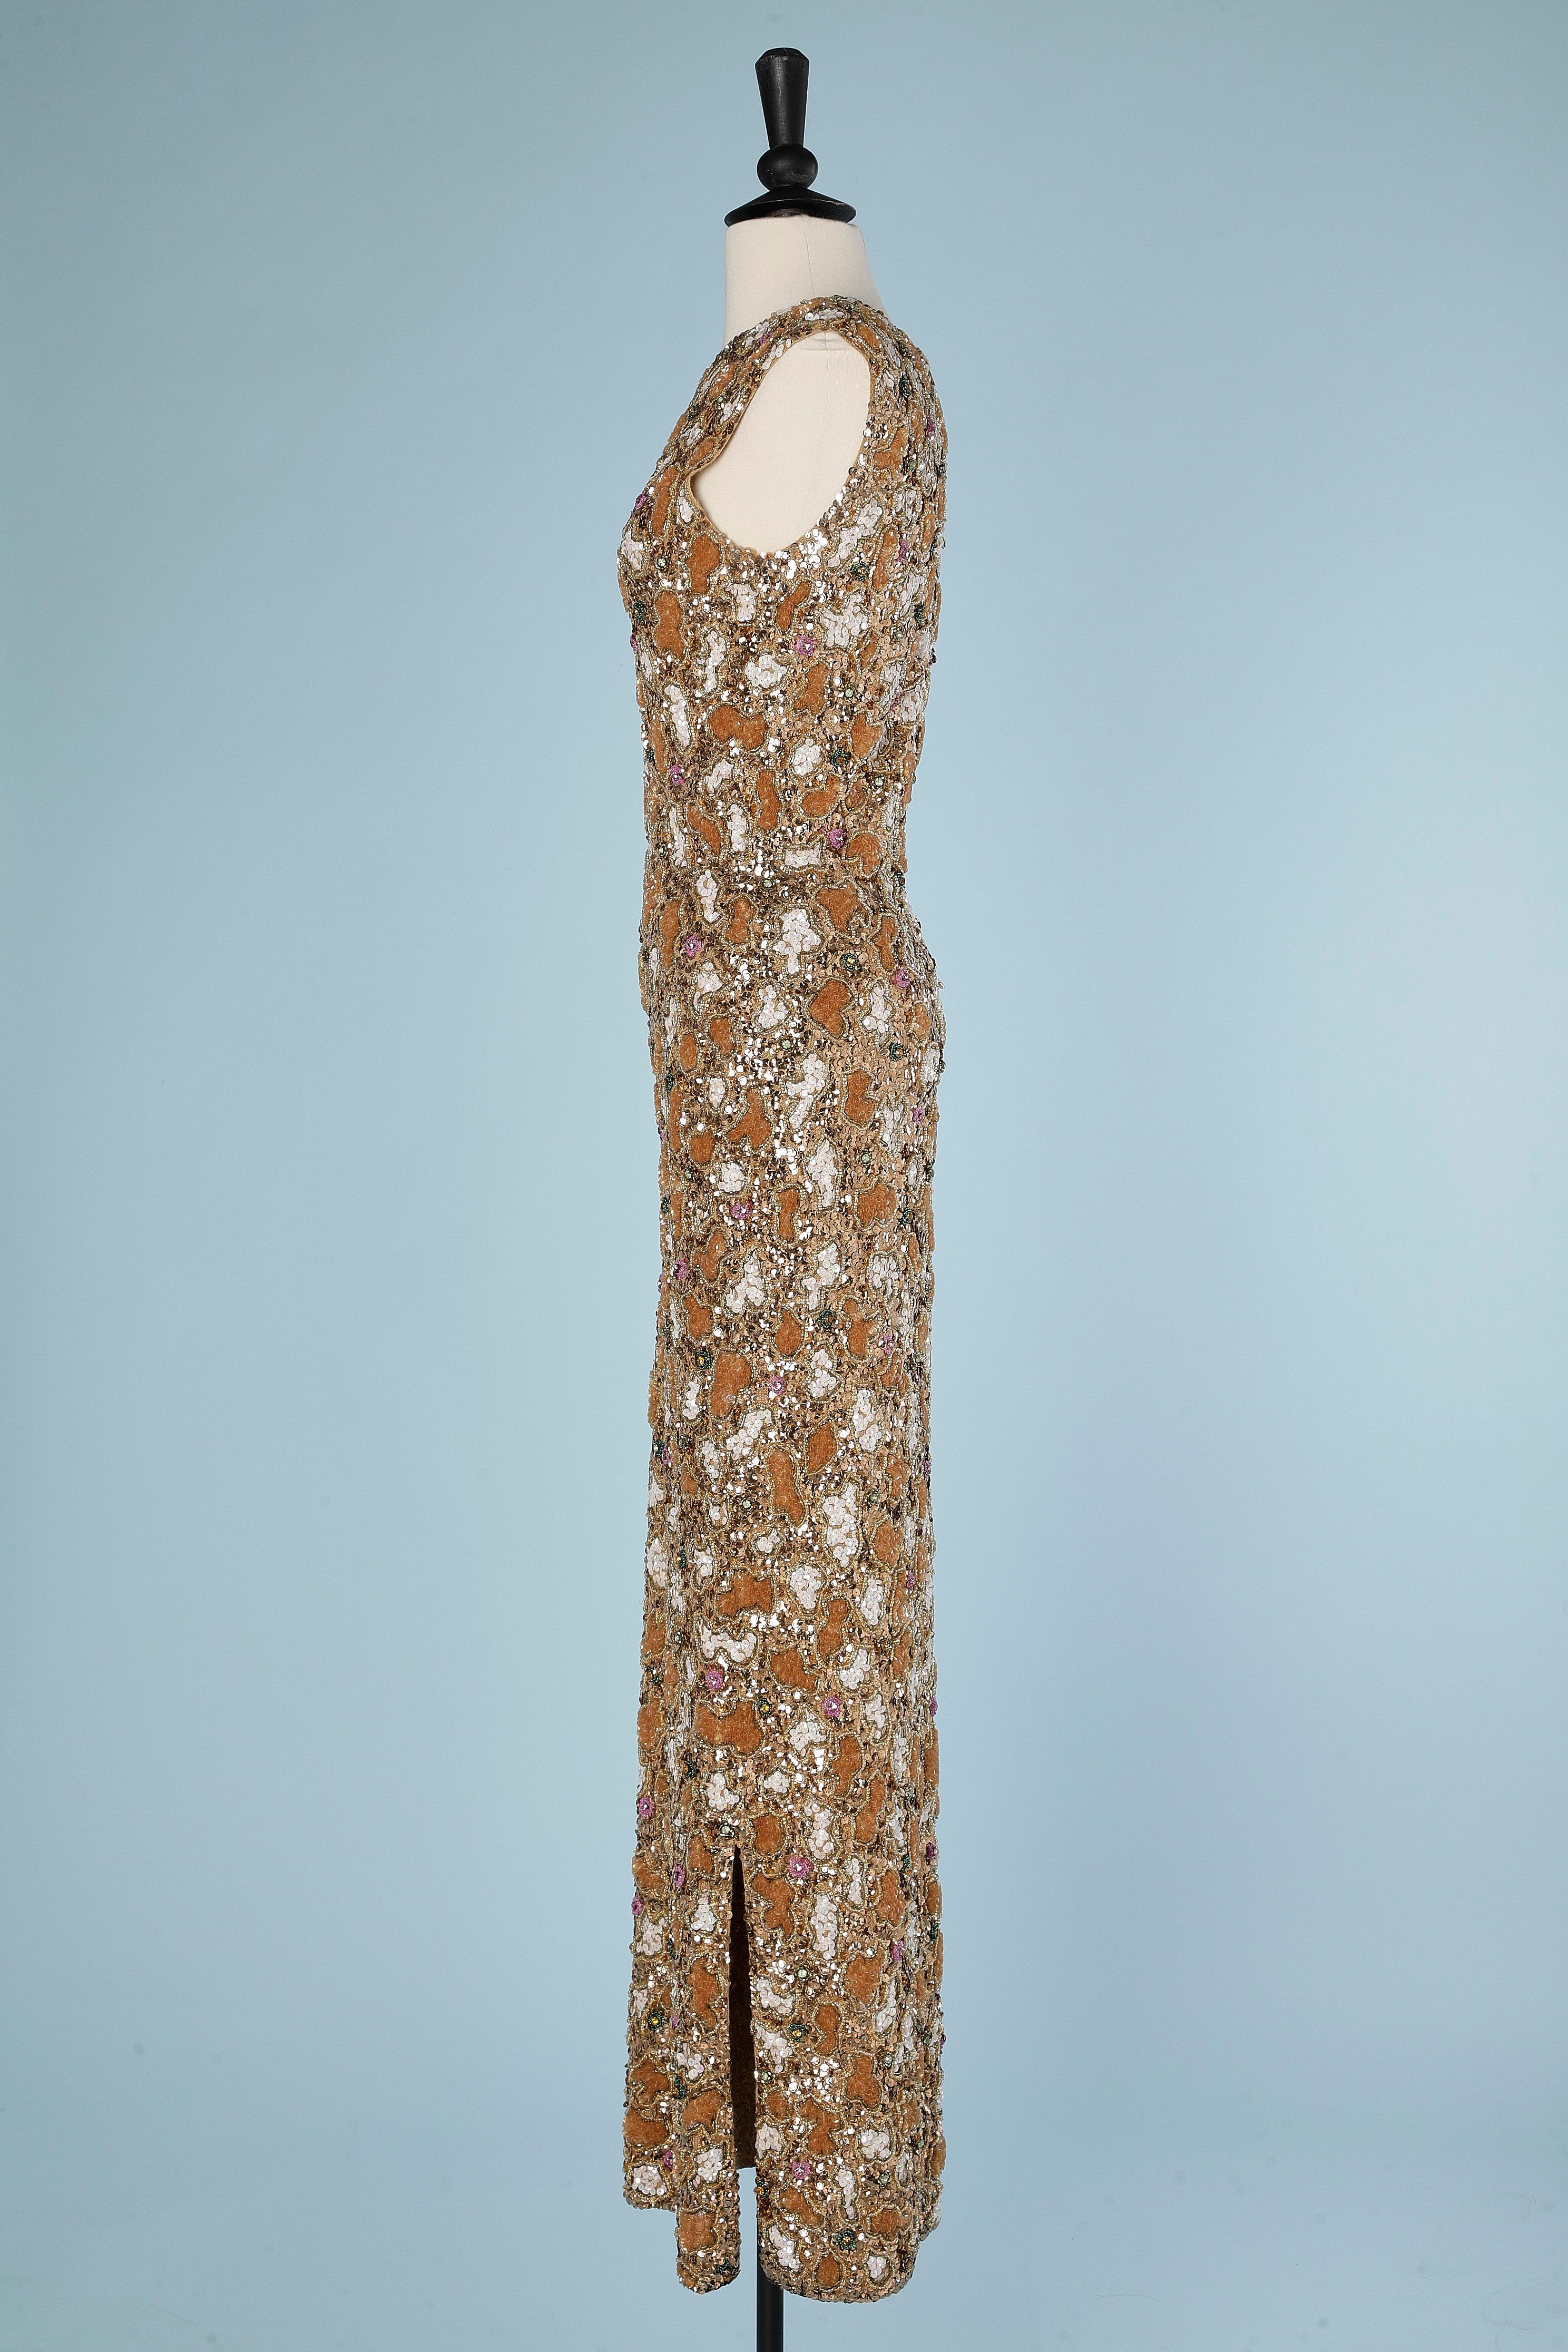 Brown Evening dress with beaded work on knit base Gene Shelly Circa 1960's